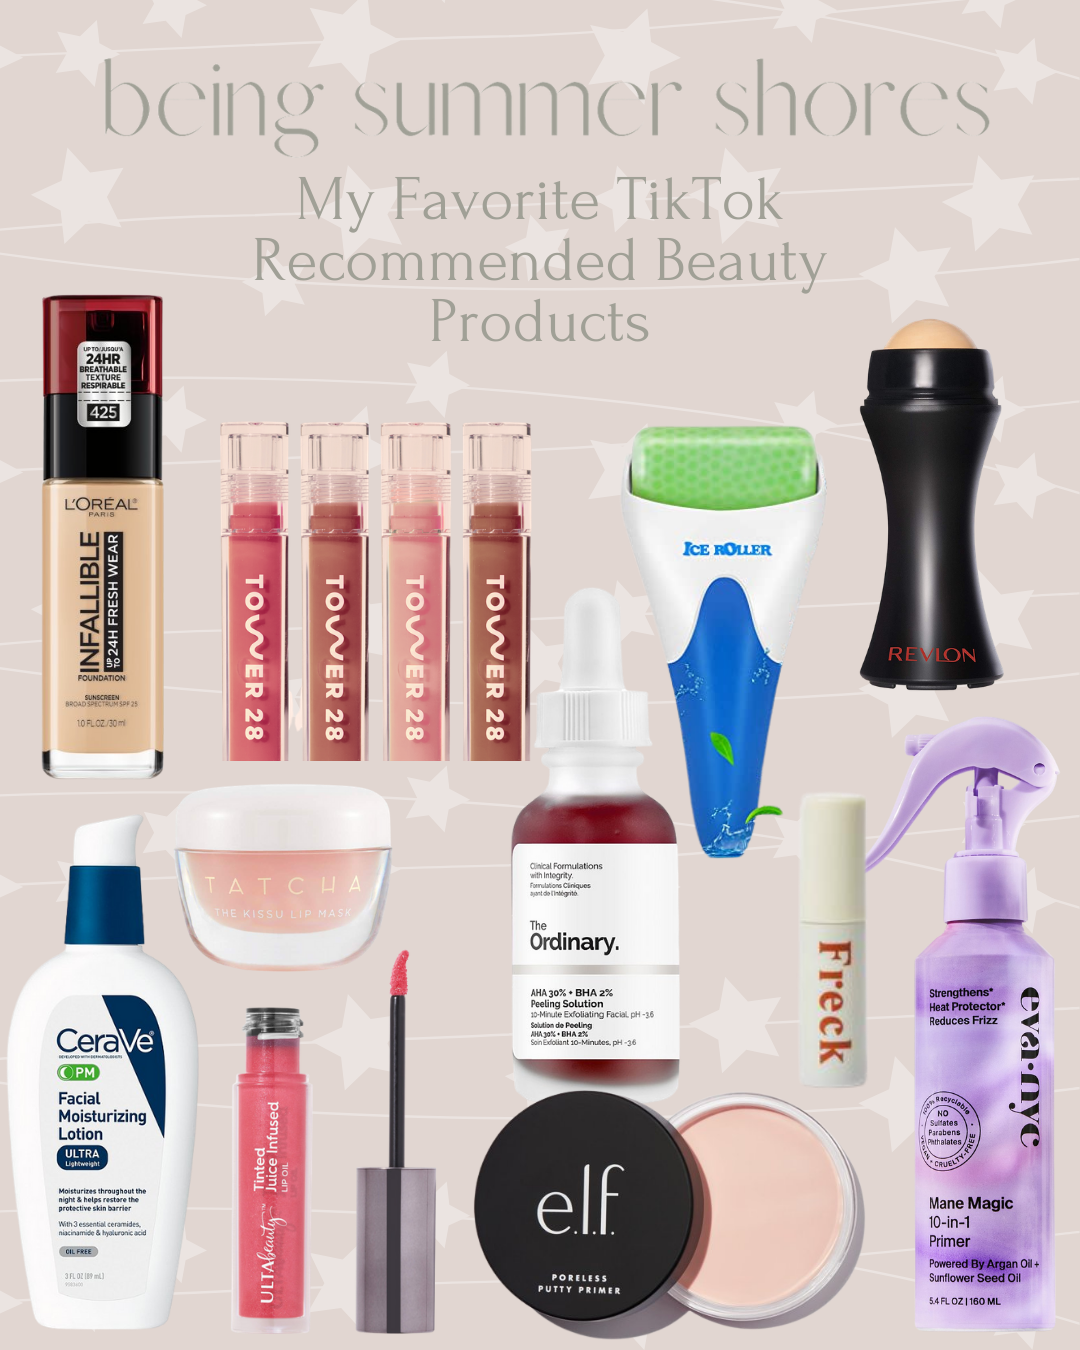 My Favorite TikTok Recommended Beauty Products - Being Summer Shores